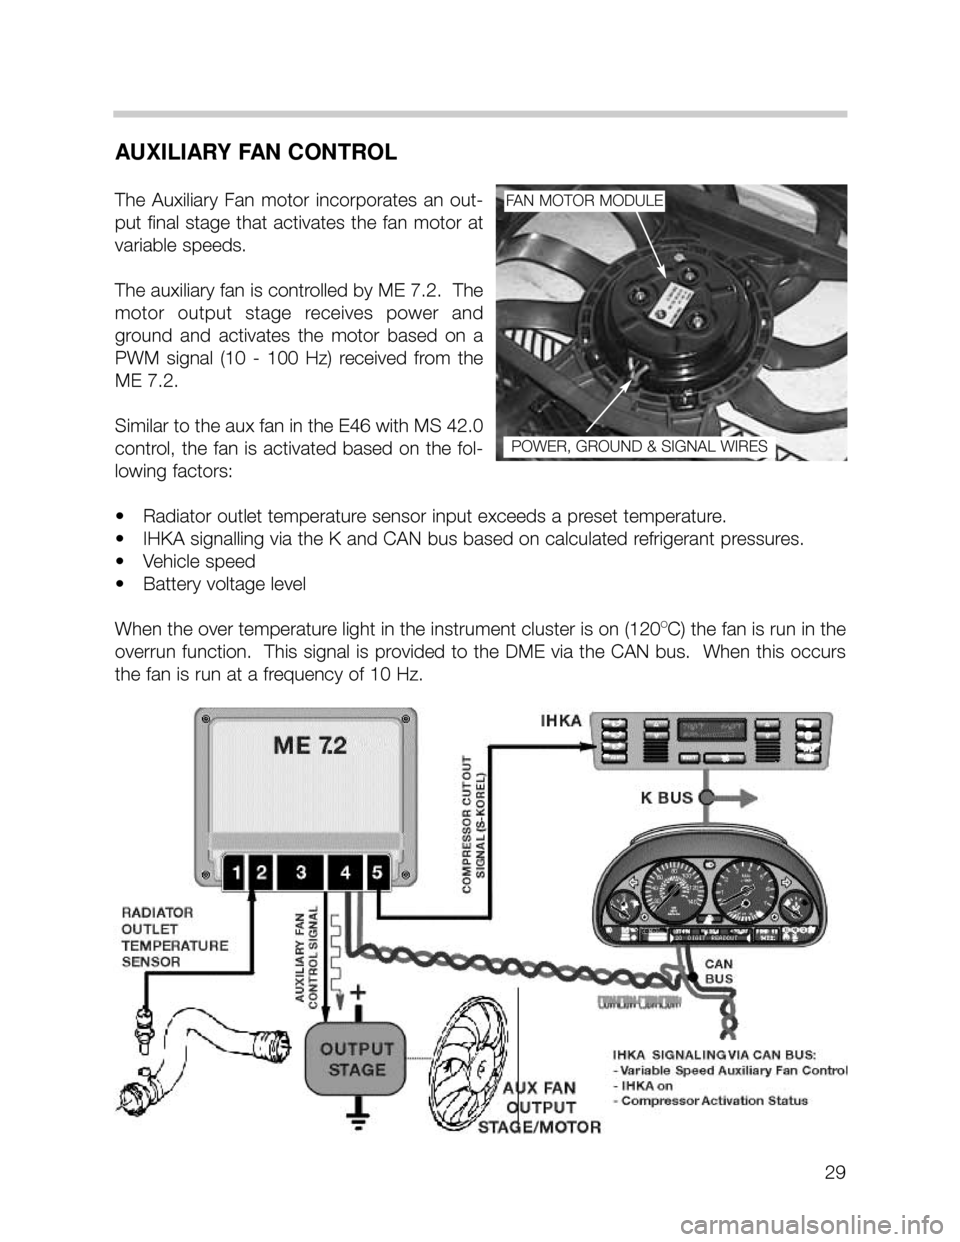 BMW X5 2004 E53 M62TU Engine Workshop Manual 29
AUXILIARY FAN CONTROL
The  Auxiliary  Fan  motor  incorporates  an  out-
put  final  stage  that  activates  the  fan  motor  at
variable speeds.  
The auxiliary fan is controlled by ME 7.2.  The
m